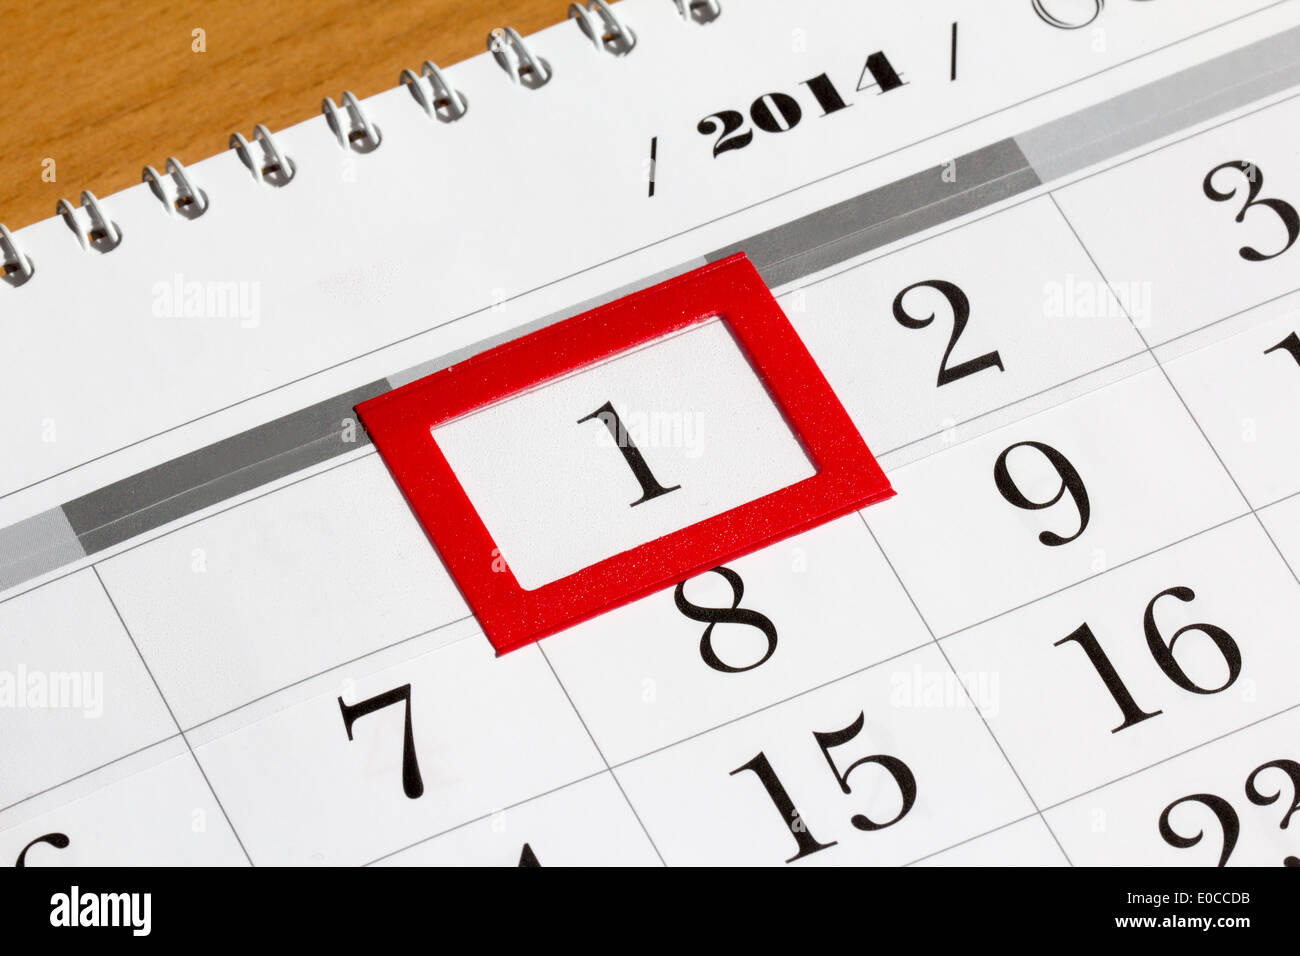 Calendar page with marked date of 2014 Stock Photo